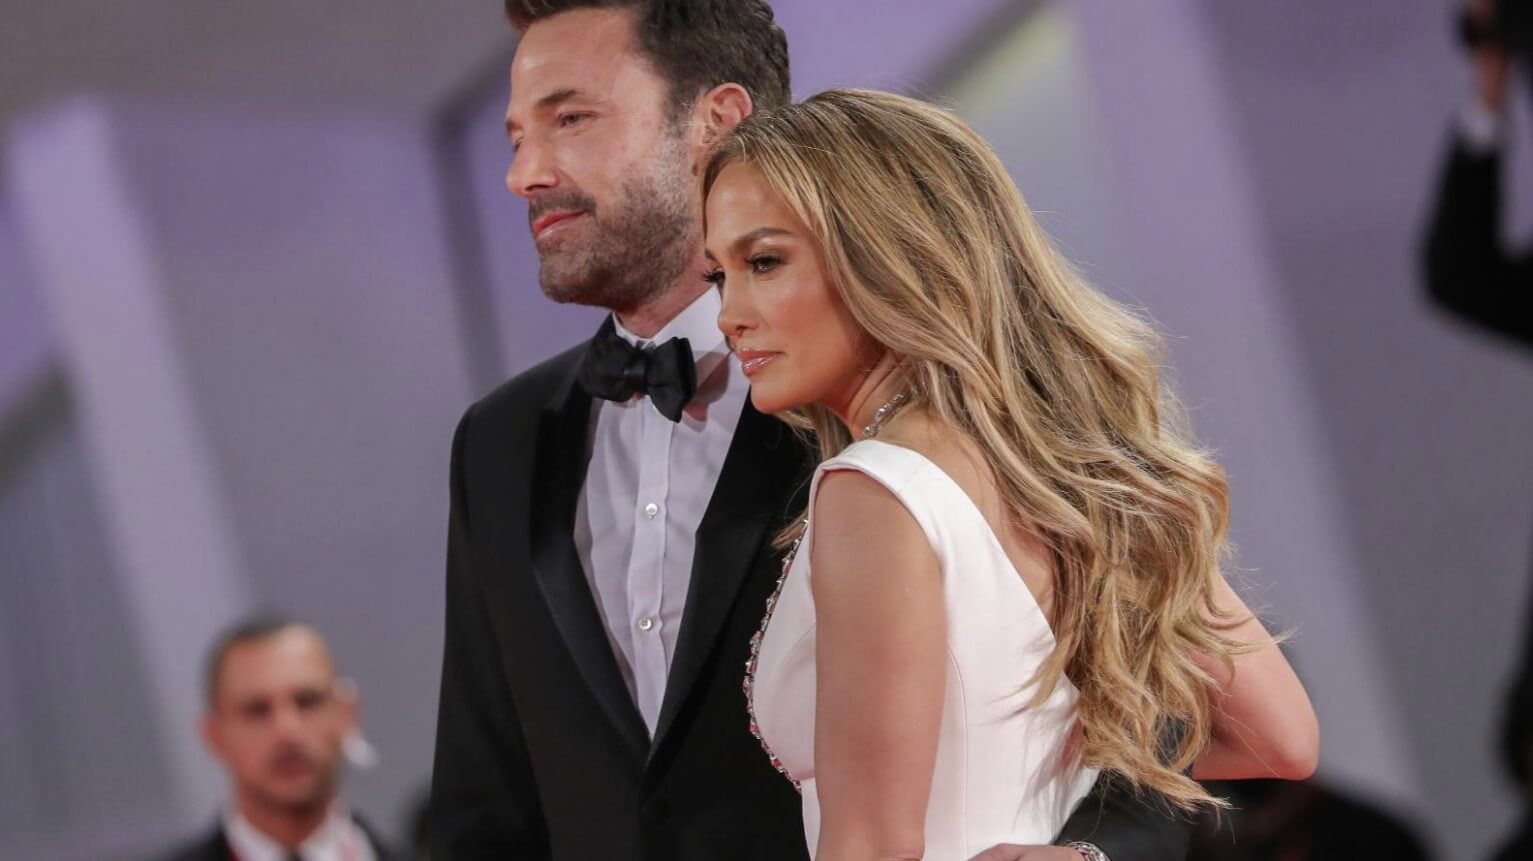 Jennifer Lopez and Ben Affleck's sexy video that shocked the internet